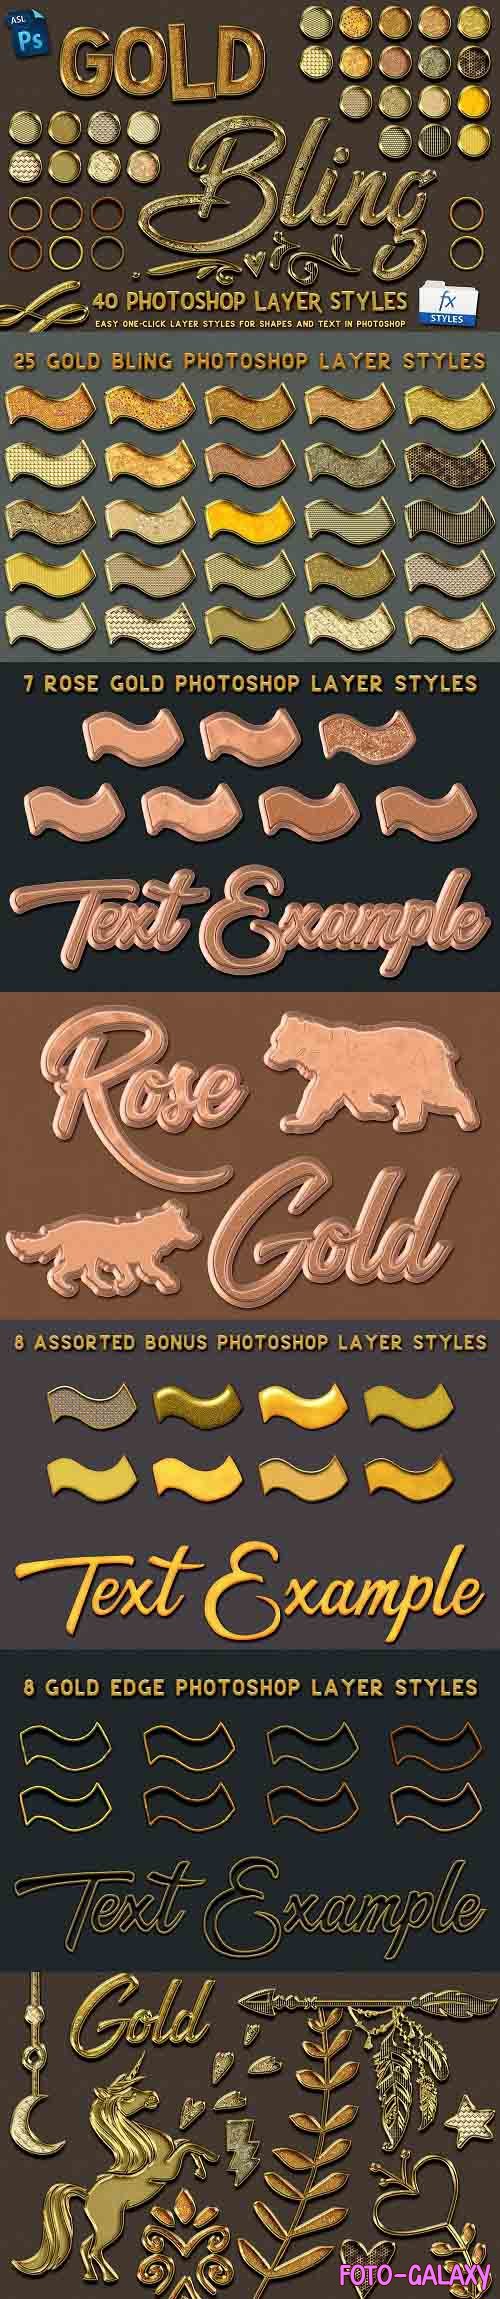 CreativeMarket - Gold Bling Photoshop Layer Styles 5115006